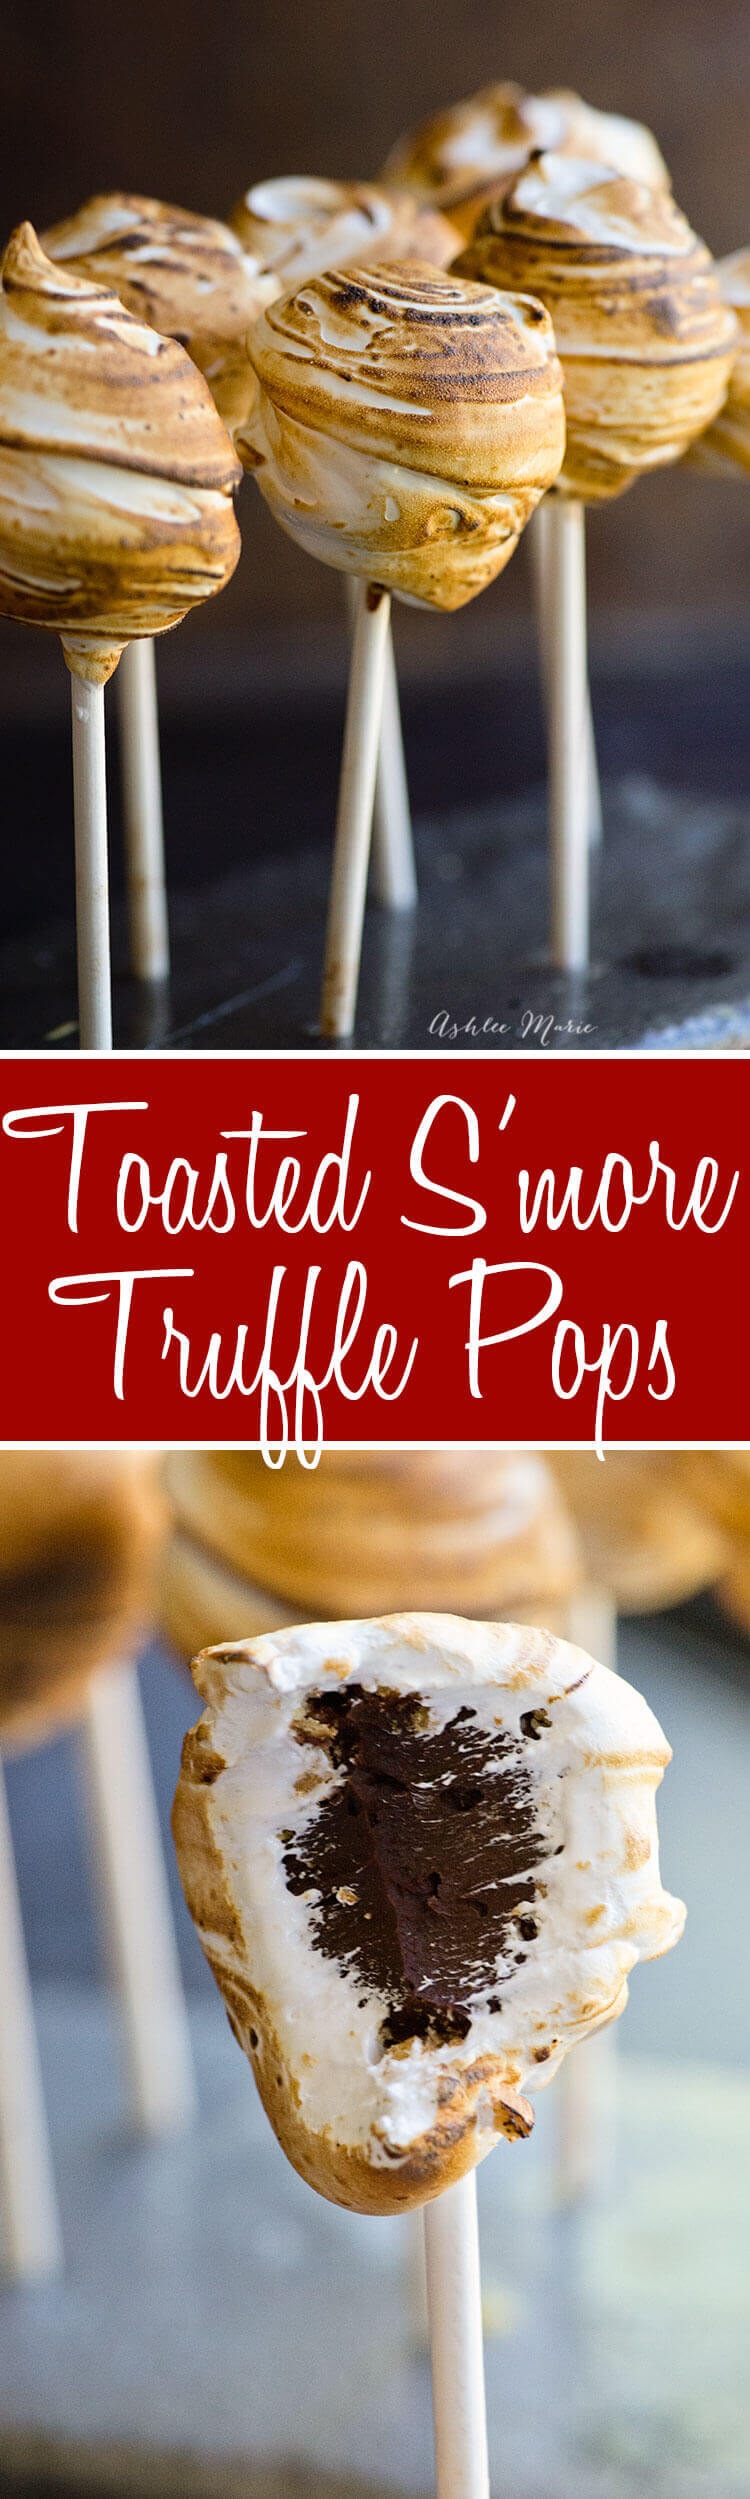 Toasted S’more Truffle Pops